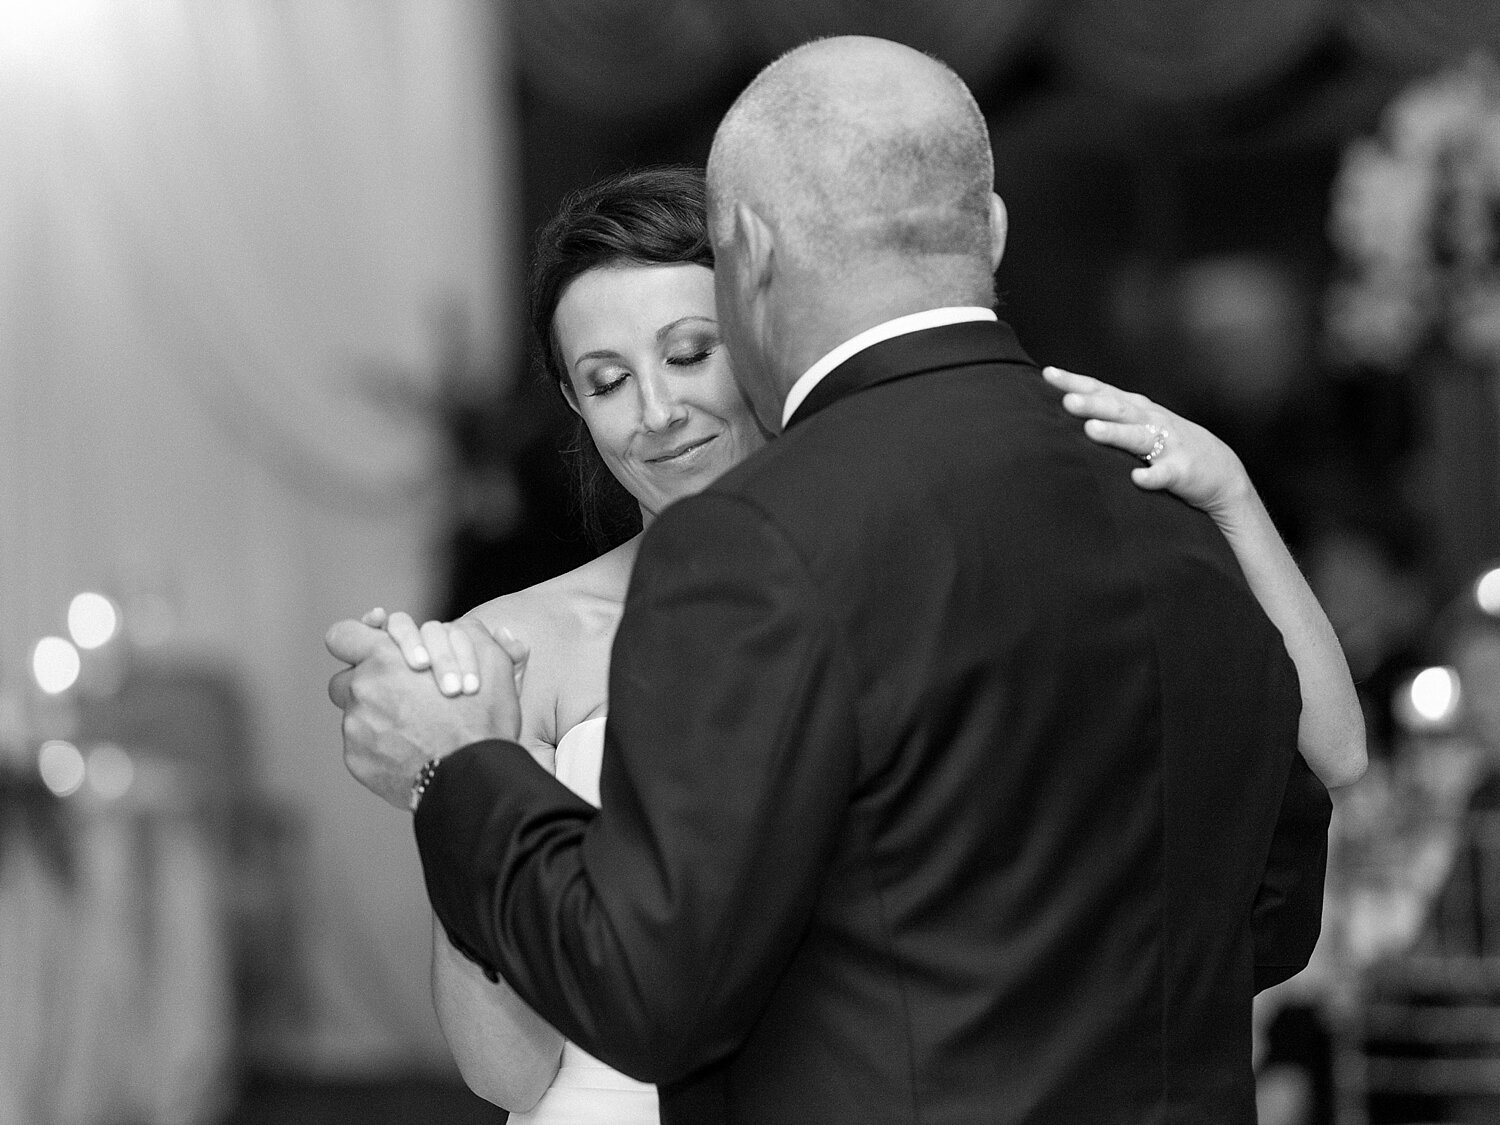 father-daughter dance photographed by Asher Gardner Photography